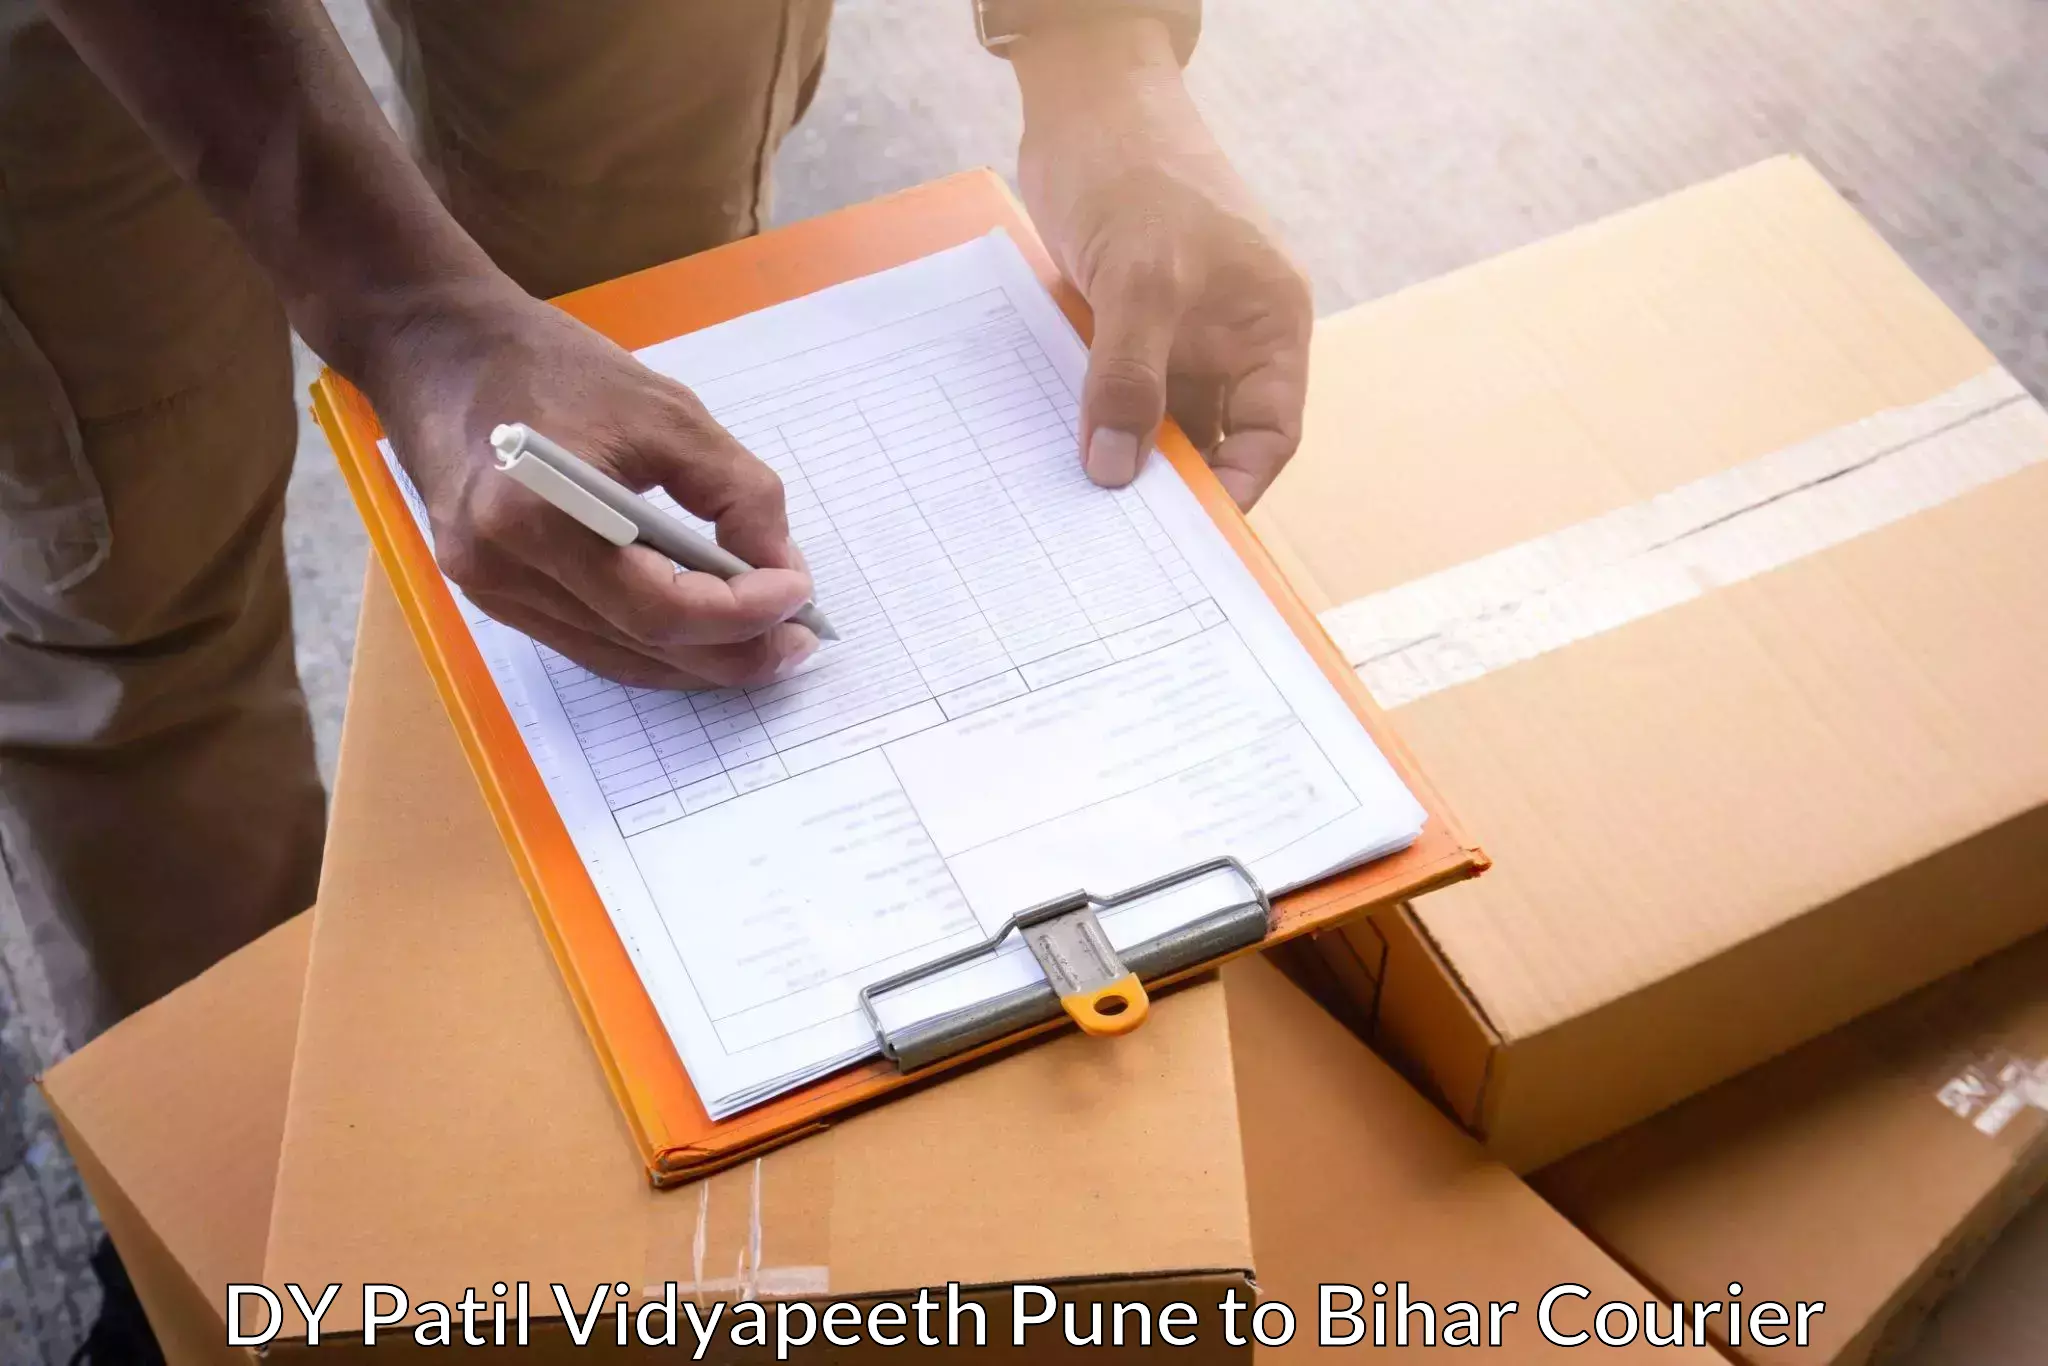 Express package services DY Patil Vidyapeeth Pune to Bihar